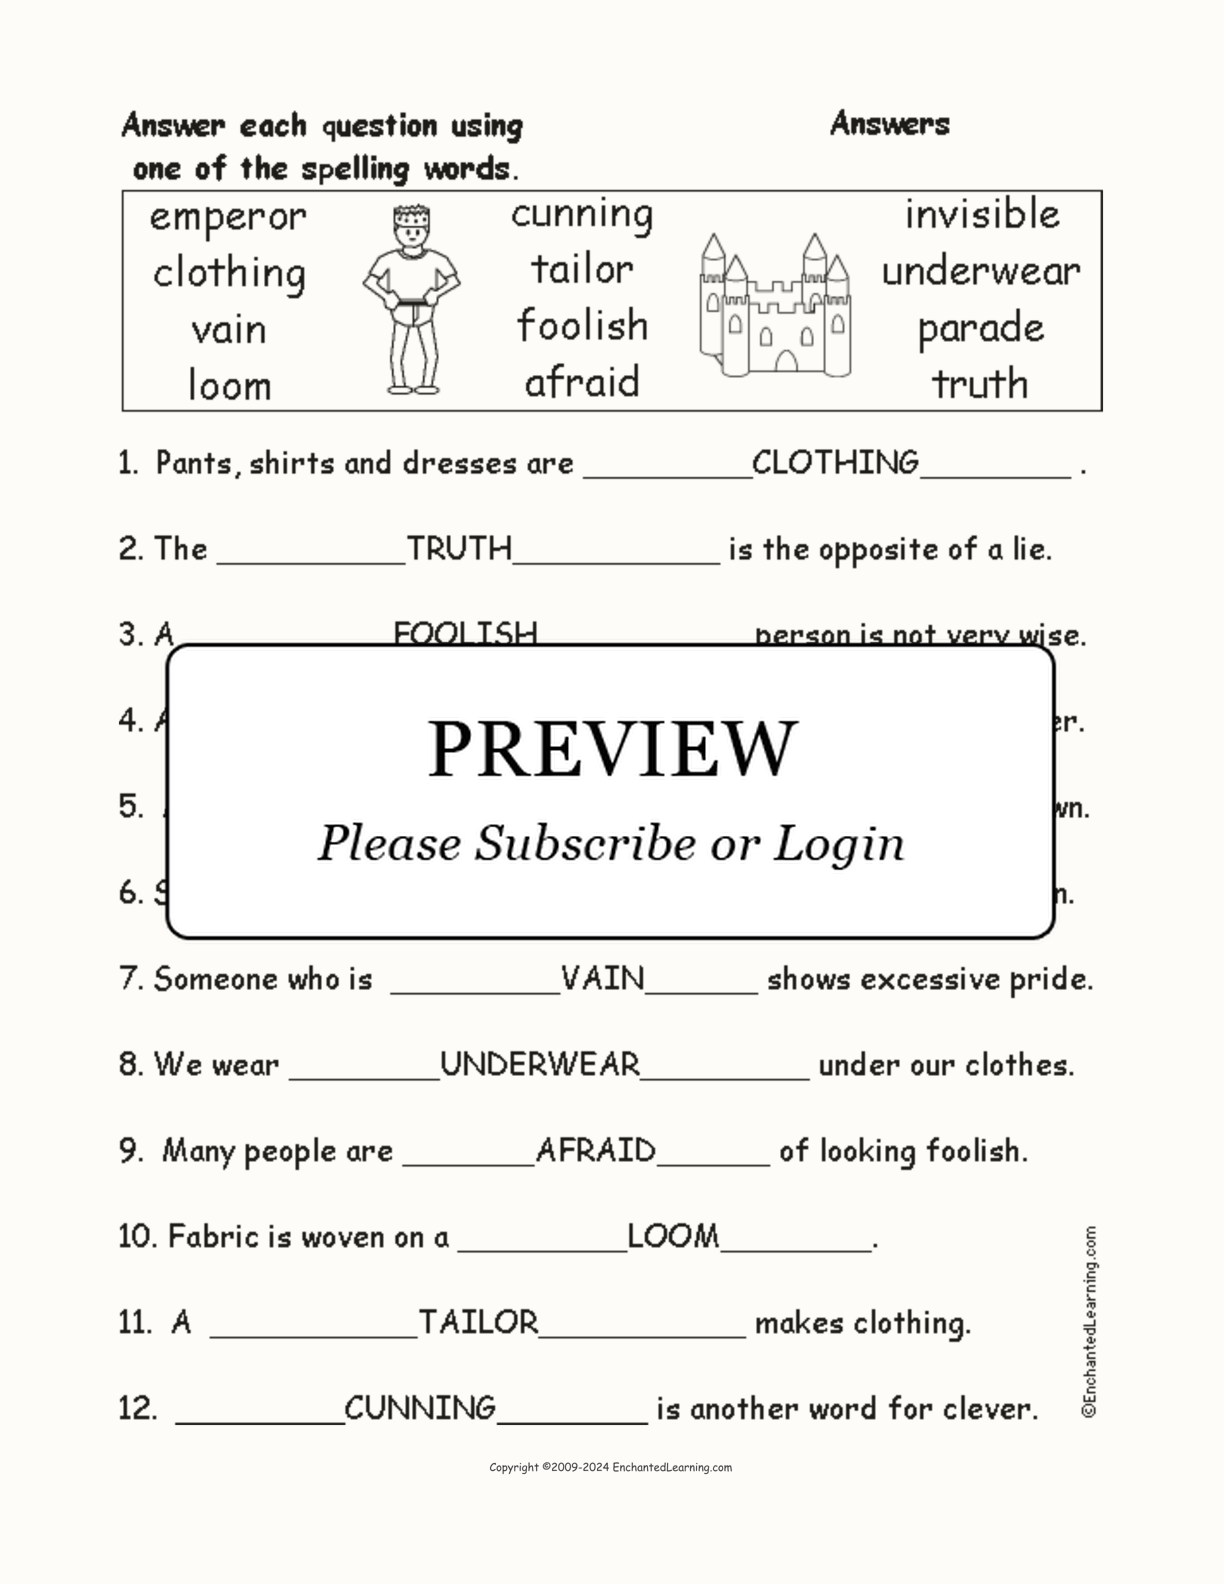 'The Emperor's New Clothes' Spelling Word Questions interactive worksheet page 2